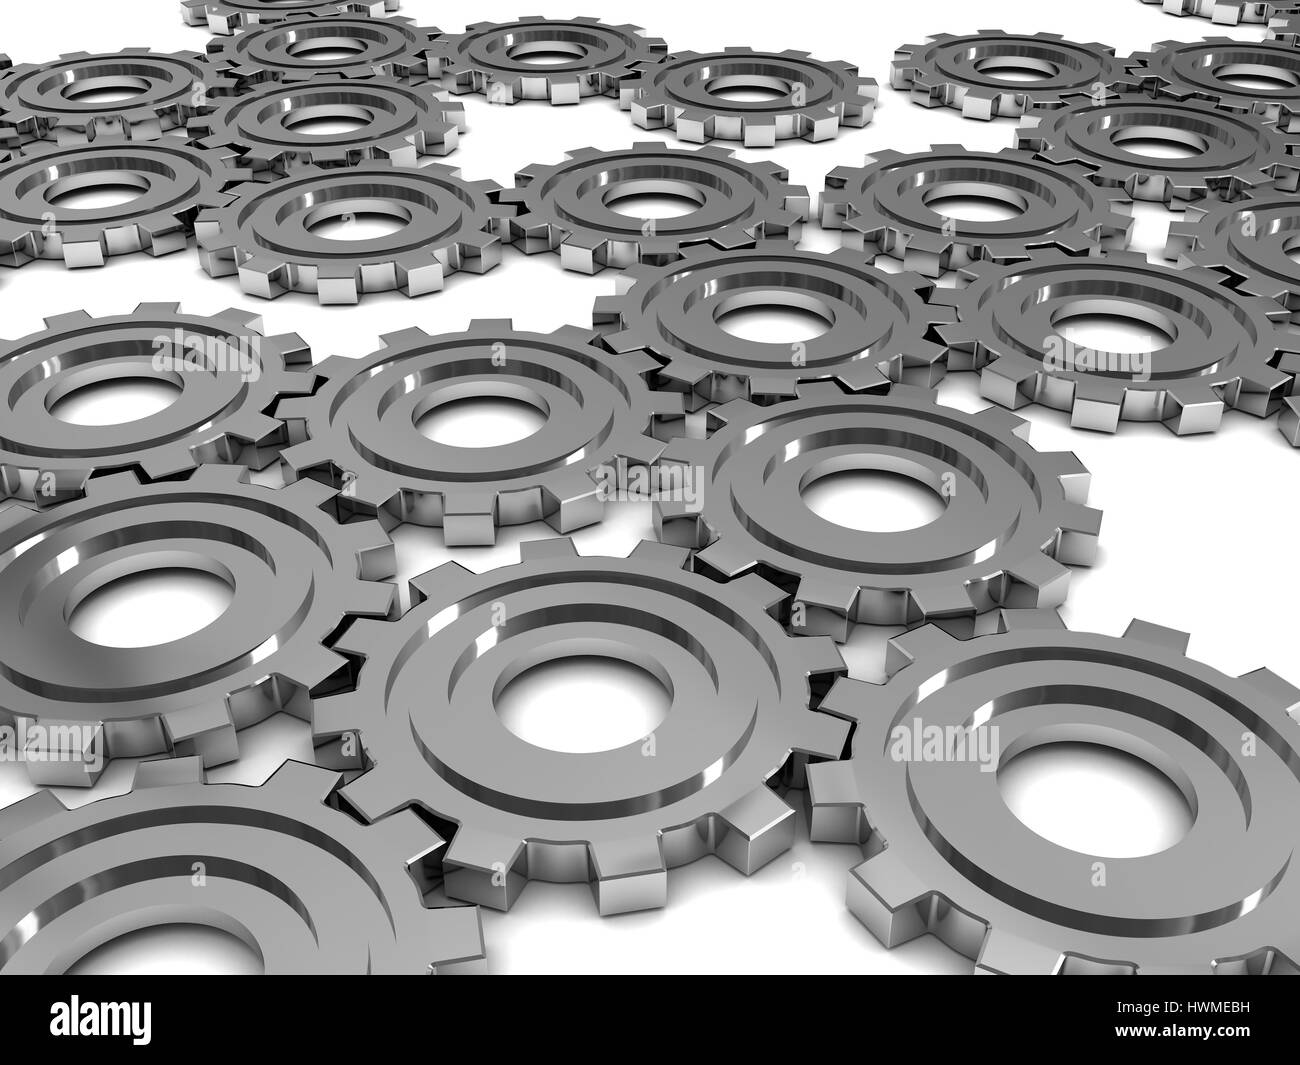 abstract 3d illustration of steel gear wheels background Stock Photo